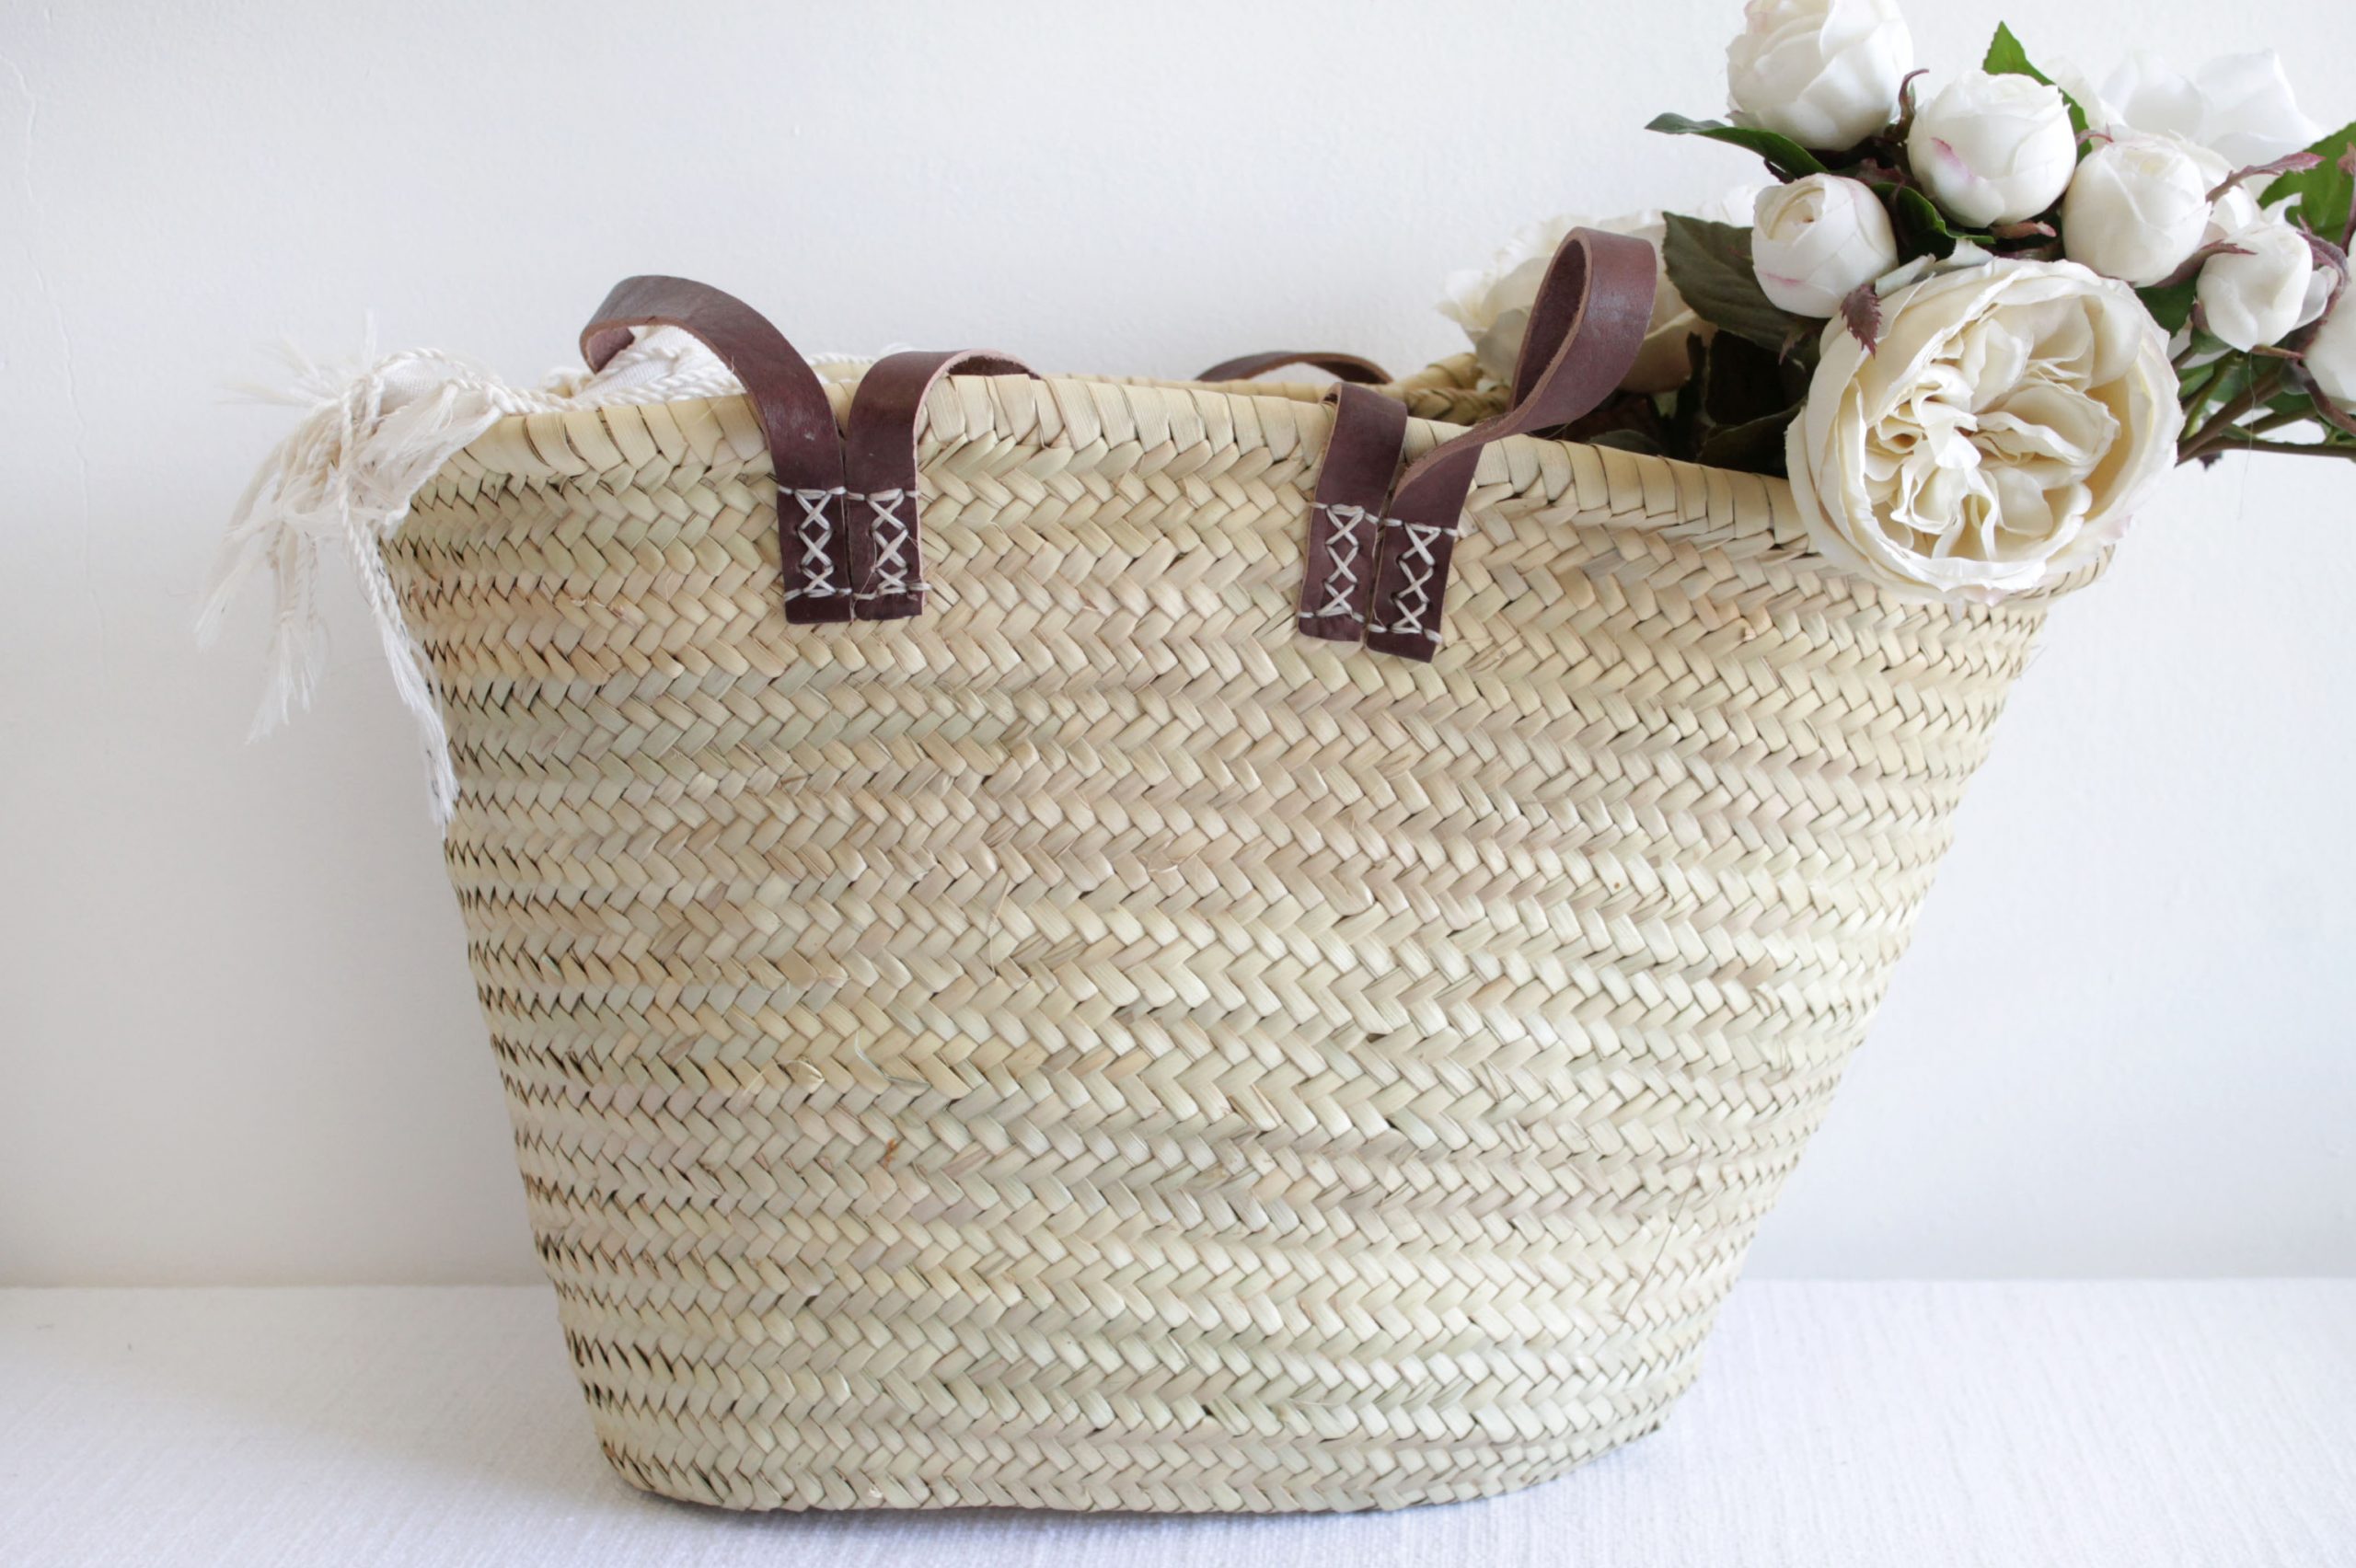 French Market Tote